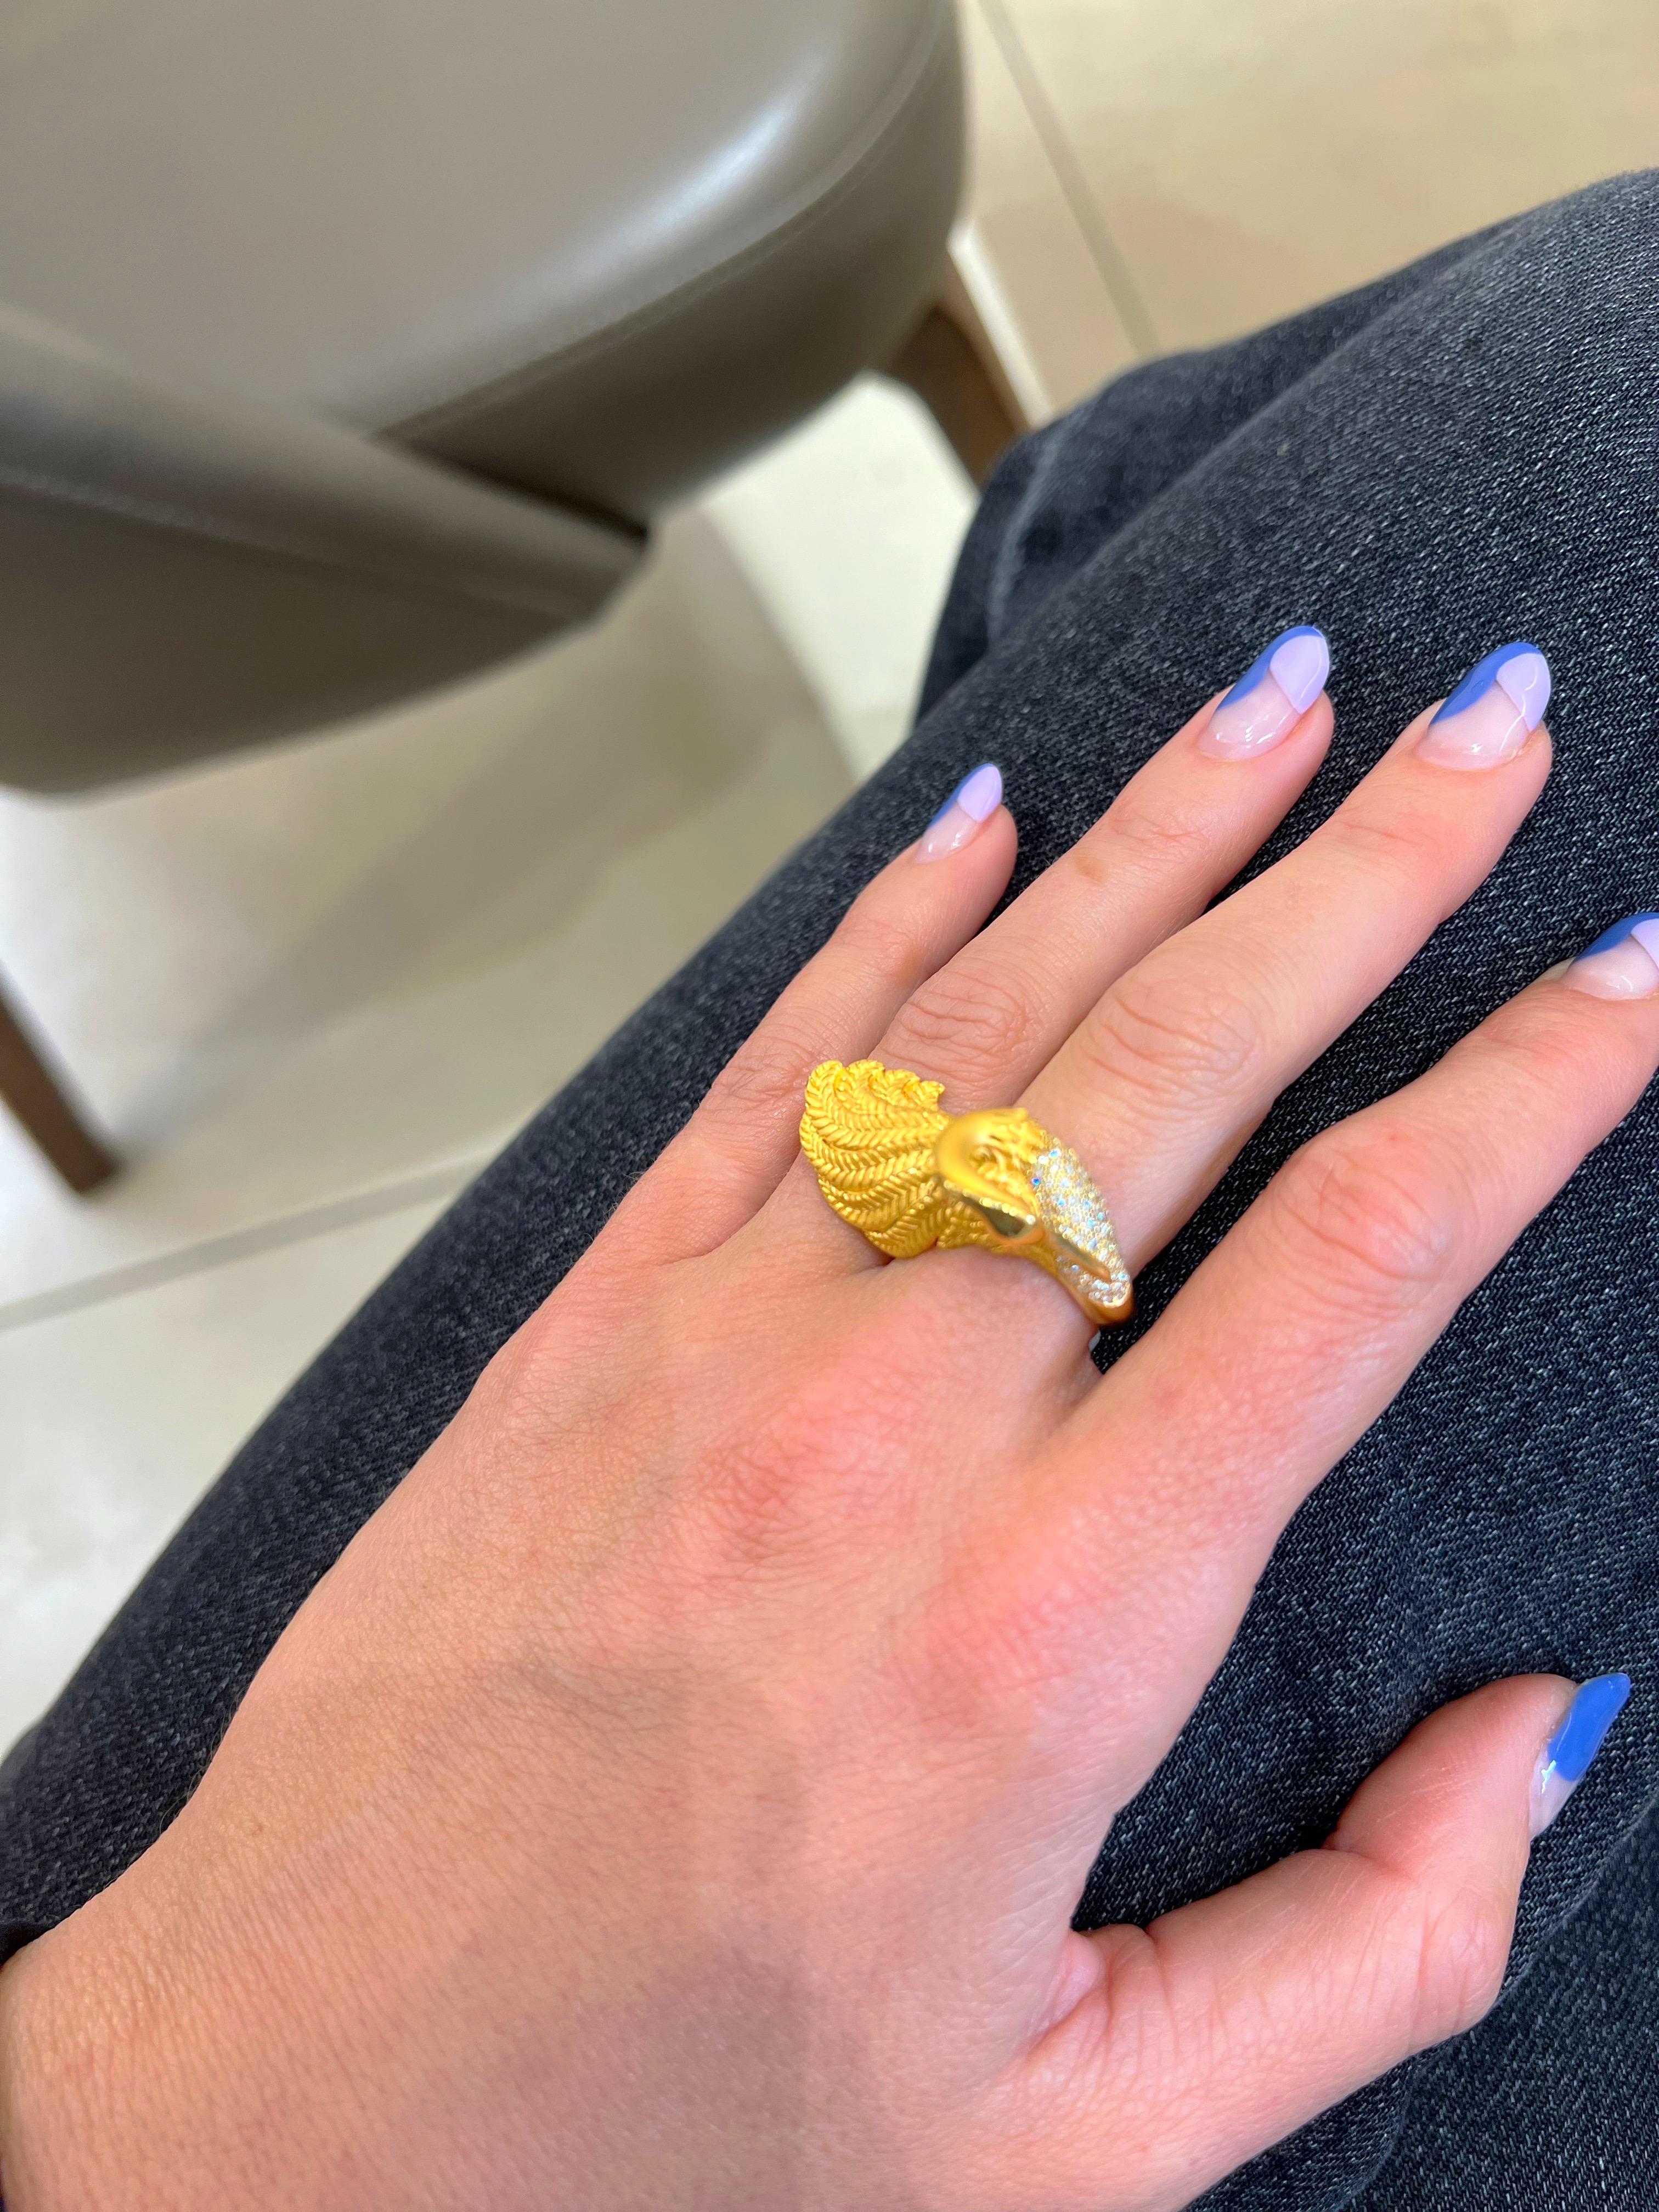 Carrera Y Carrera has built its famous name on figurative designs, an obsession with surface finishes, and a compelling way of seeing beauty in art and nature.
 This 18 karat yellow gold ring is a perfect example of Carrera's iconic designs.